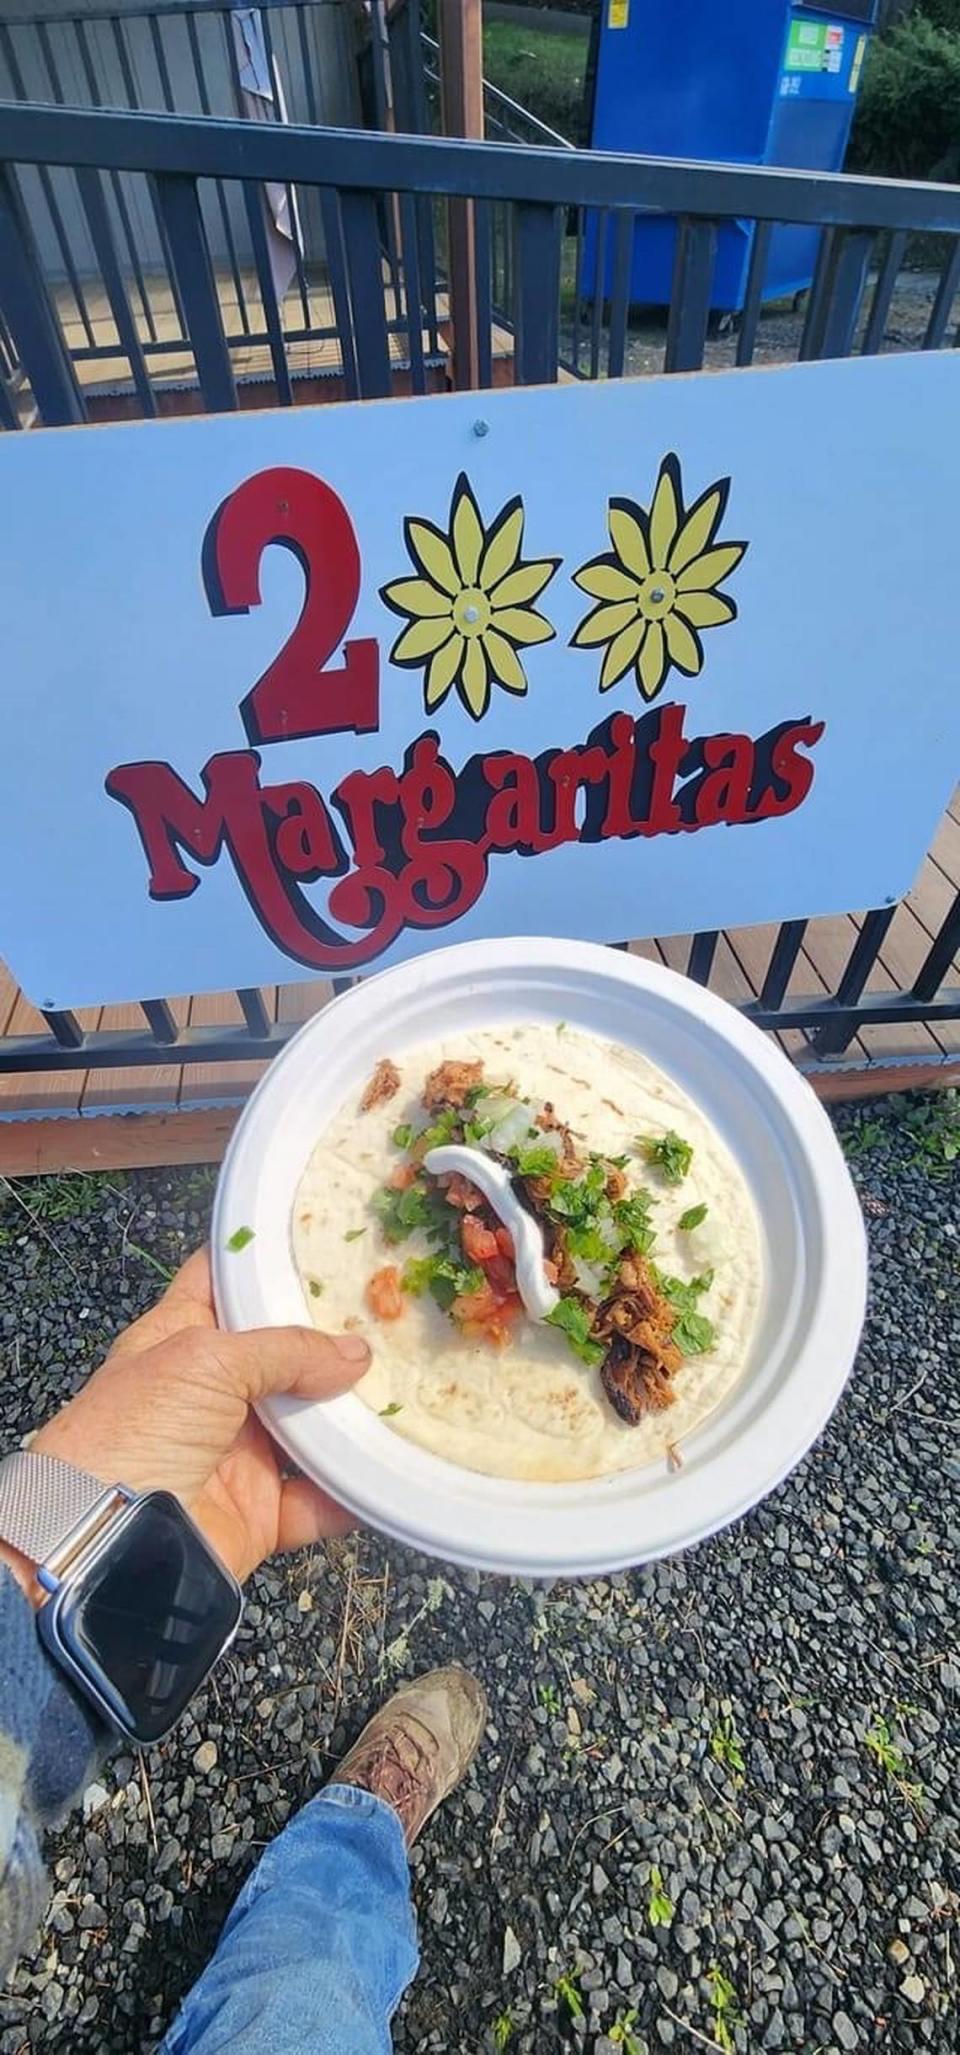 Richard and Cheryl Miller cooked free tacos in the 2 Margaritas parking lot.